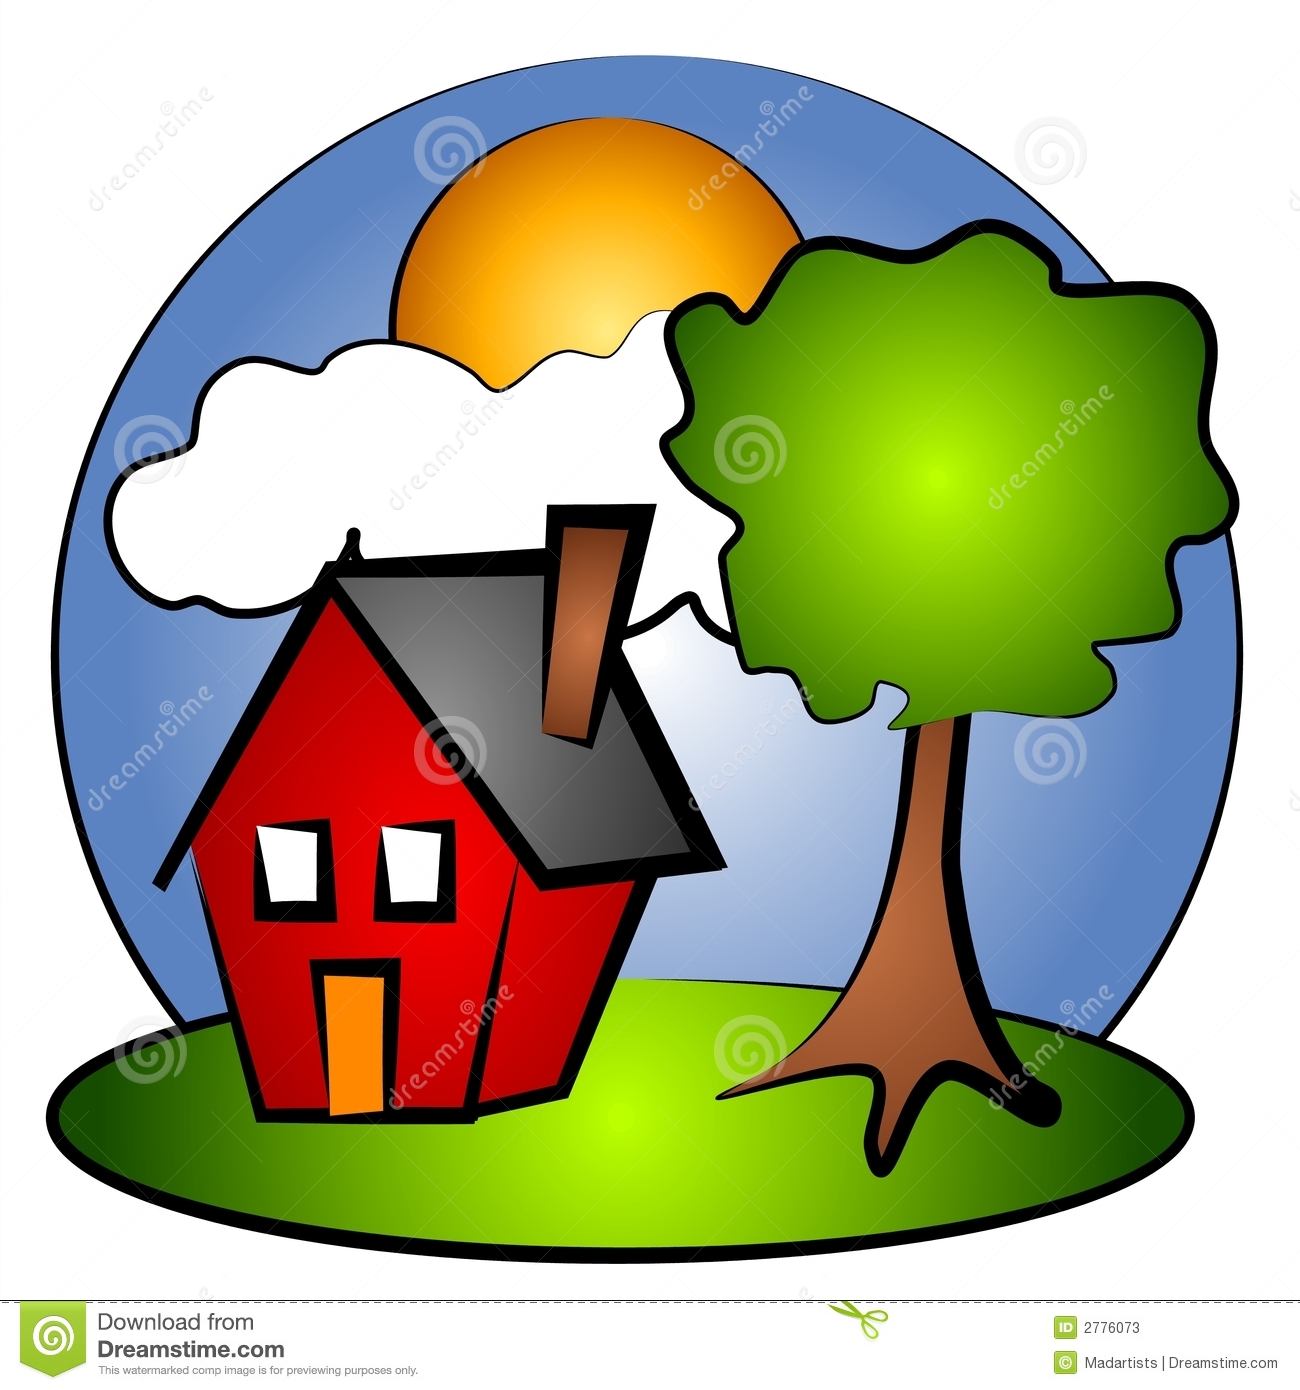 clip art for home builders - photo #6